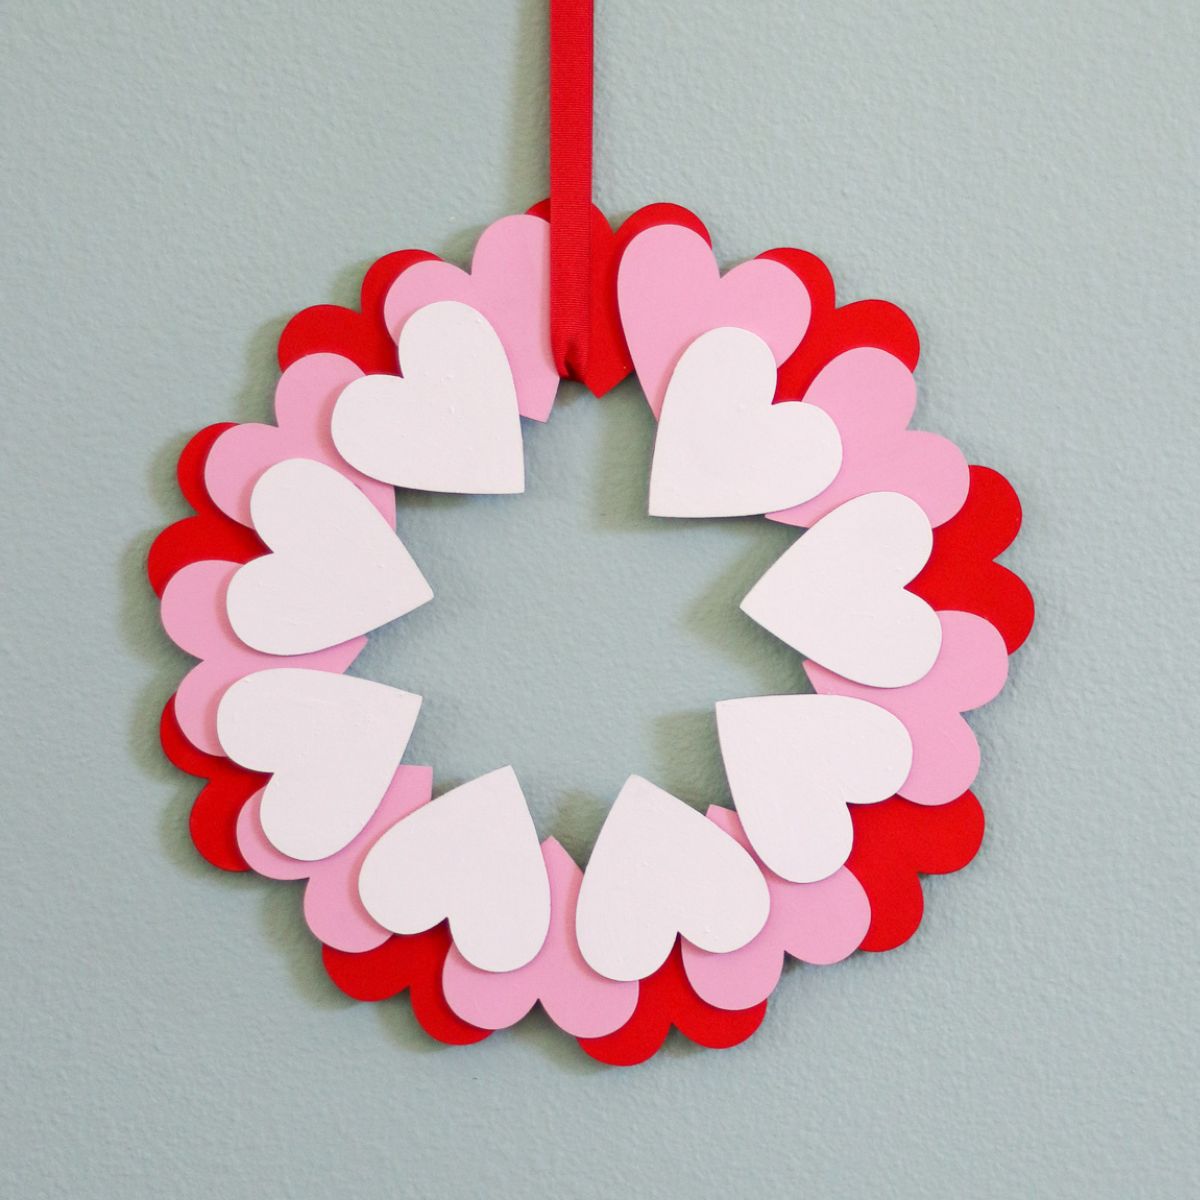 Easy to Make Wood Heart Wreath for Valentine’s Day